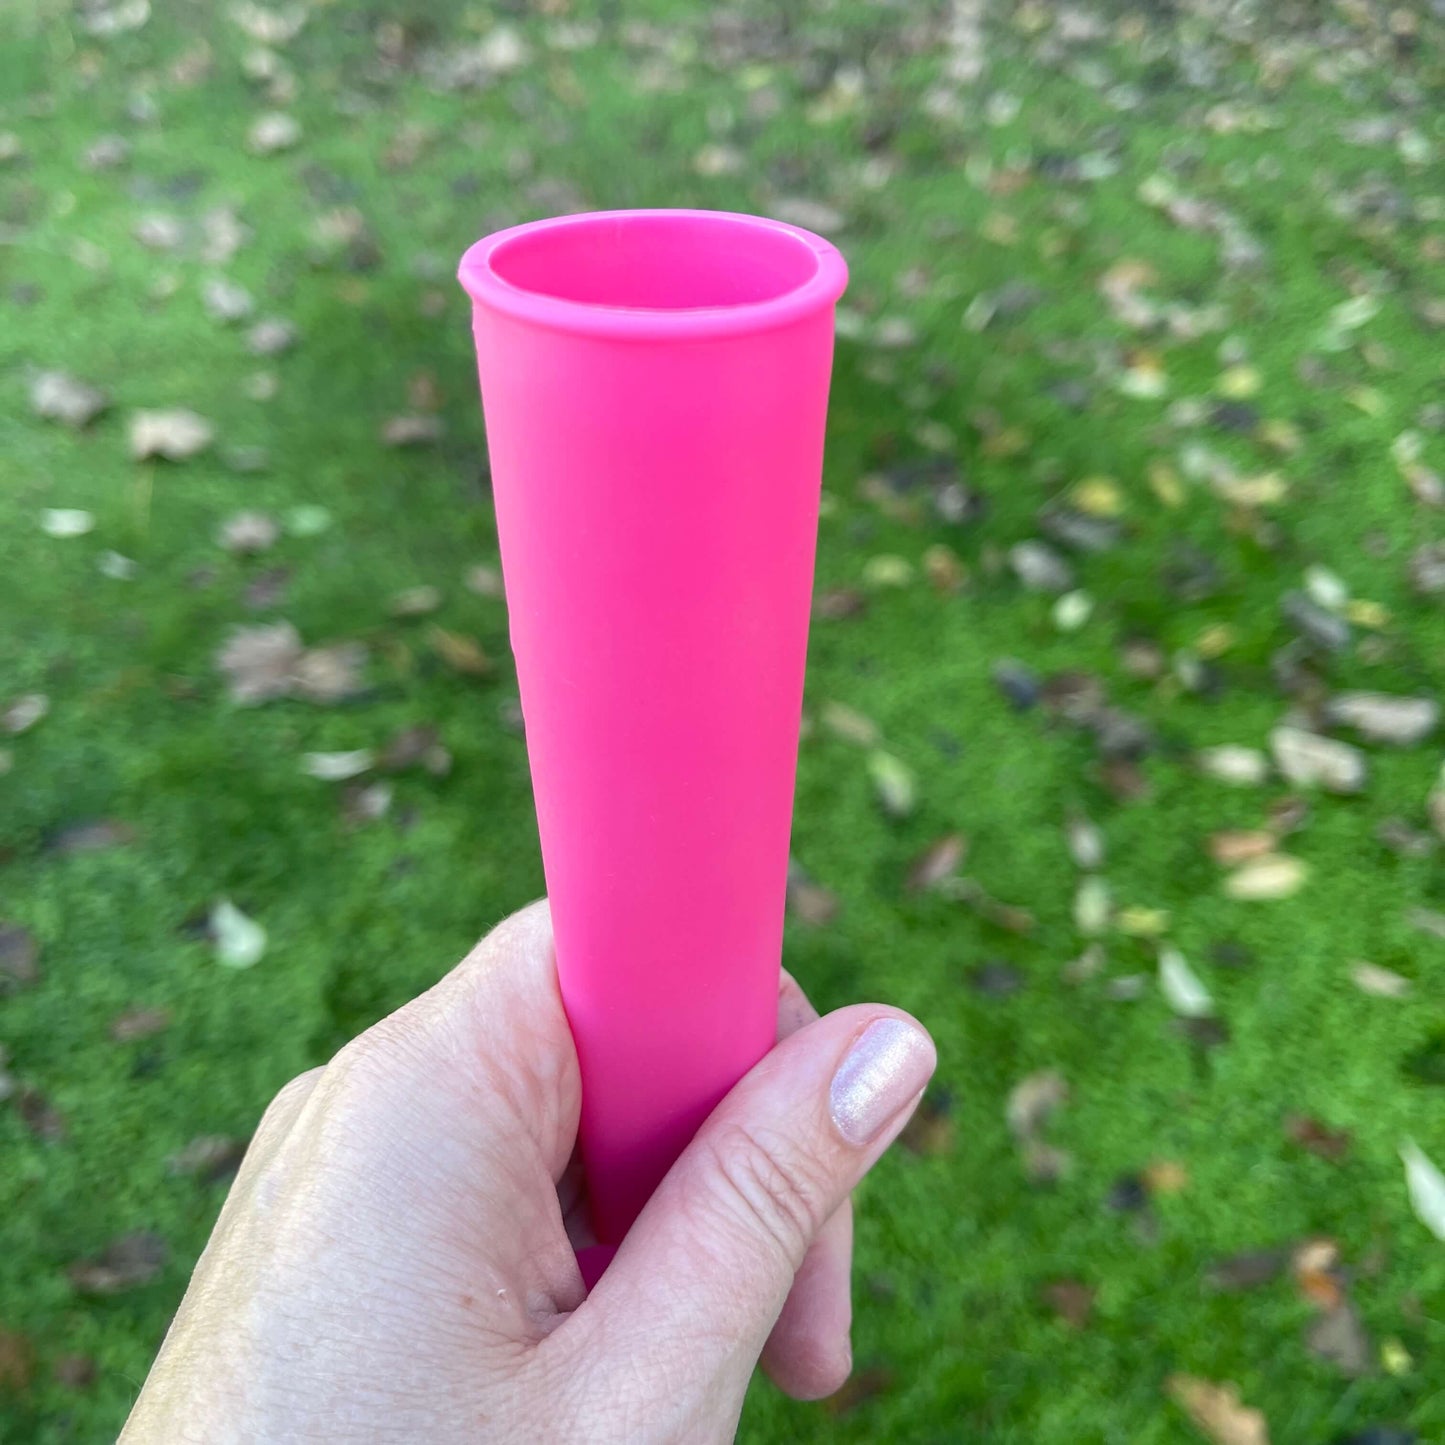 Pink silicone ice block tube being held in a womans hand.